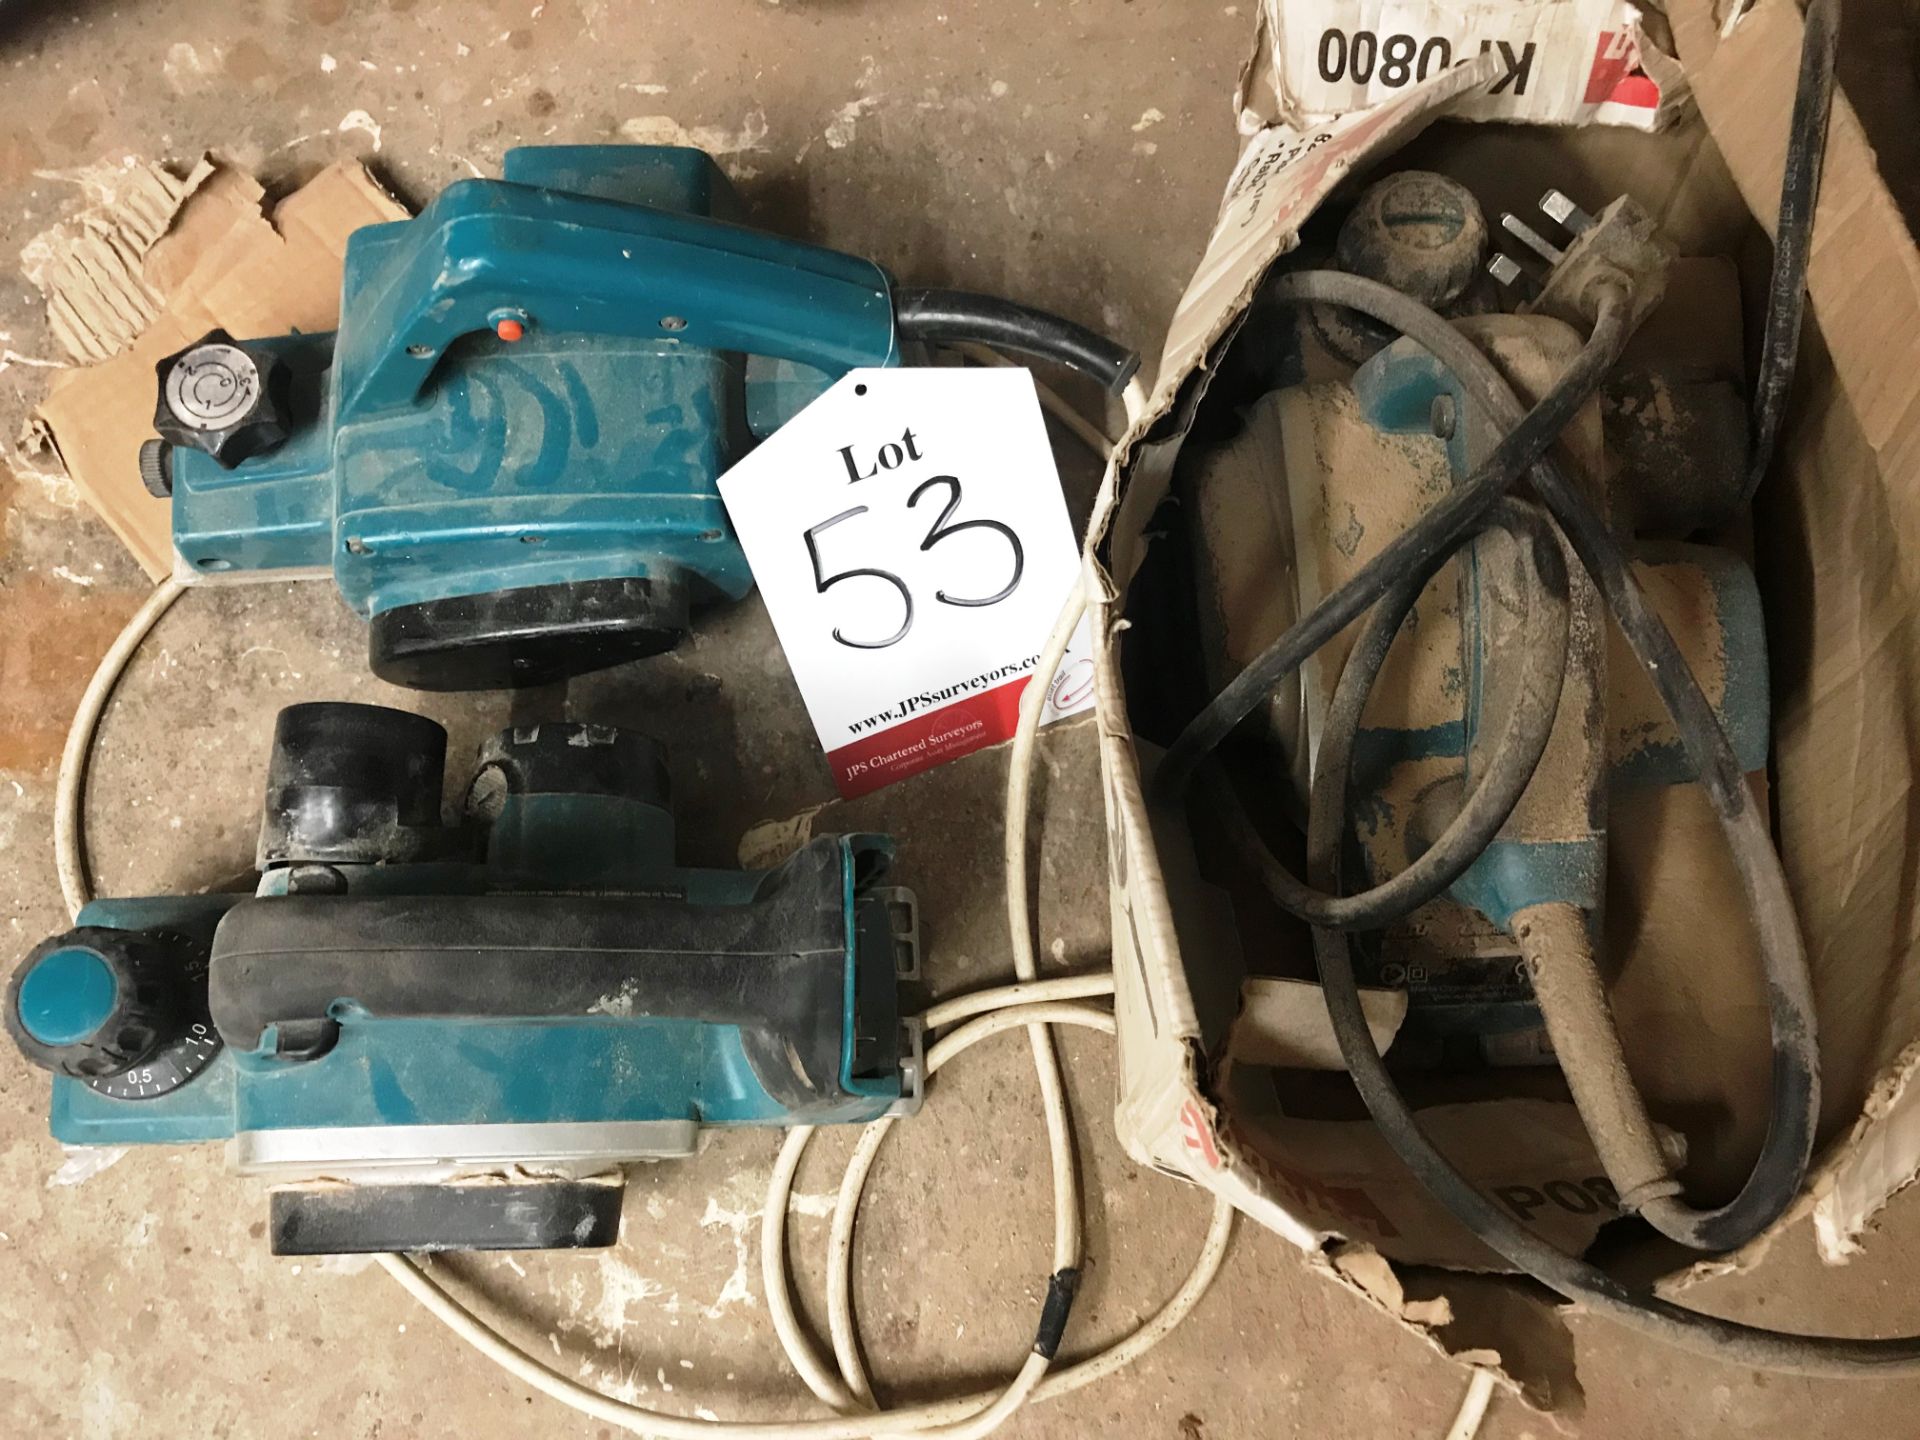 3 x Various Makita Planers - As Pictured